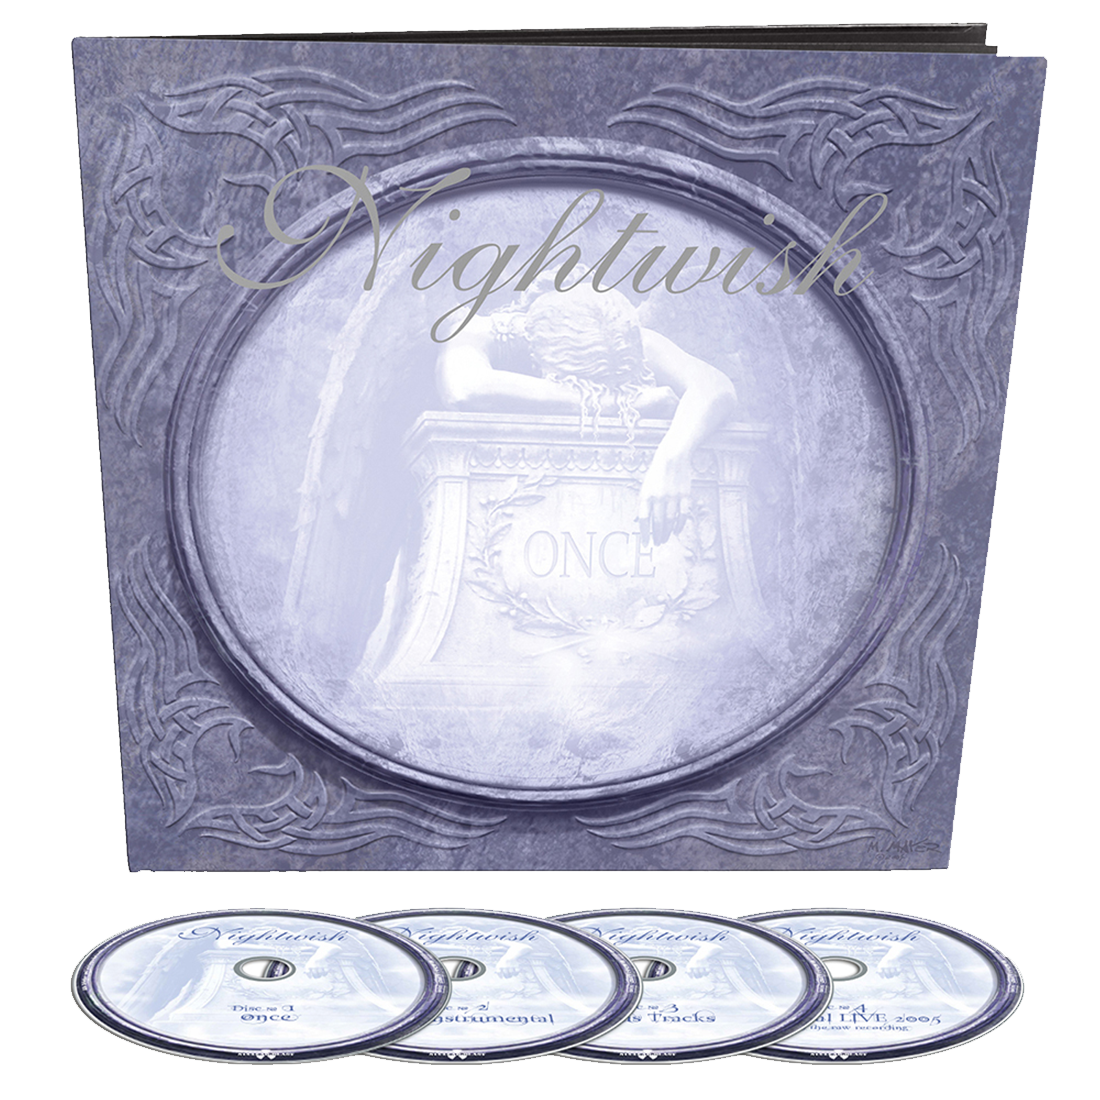 Nightwish - Once (Remastered): 4CD Earbook Box Set